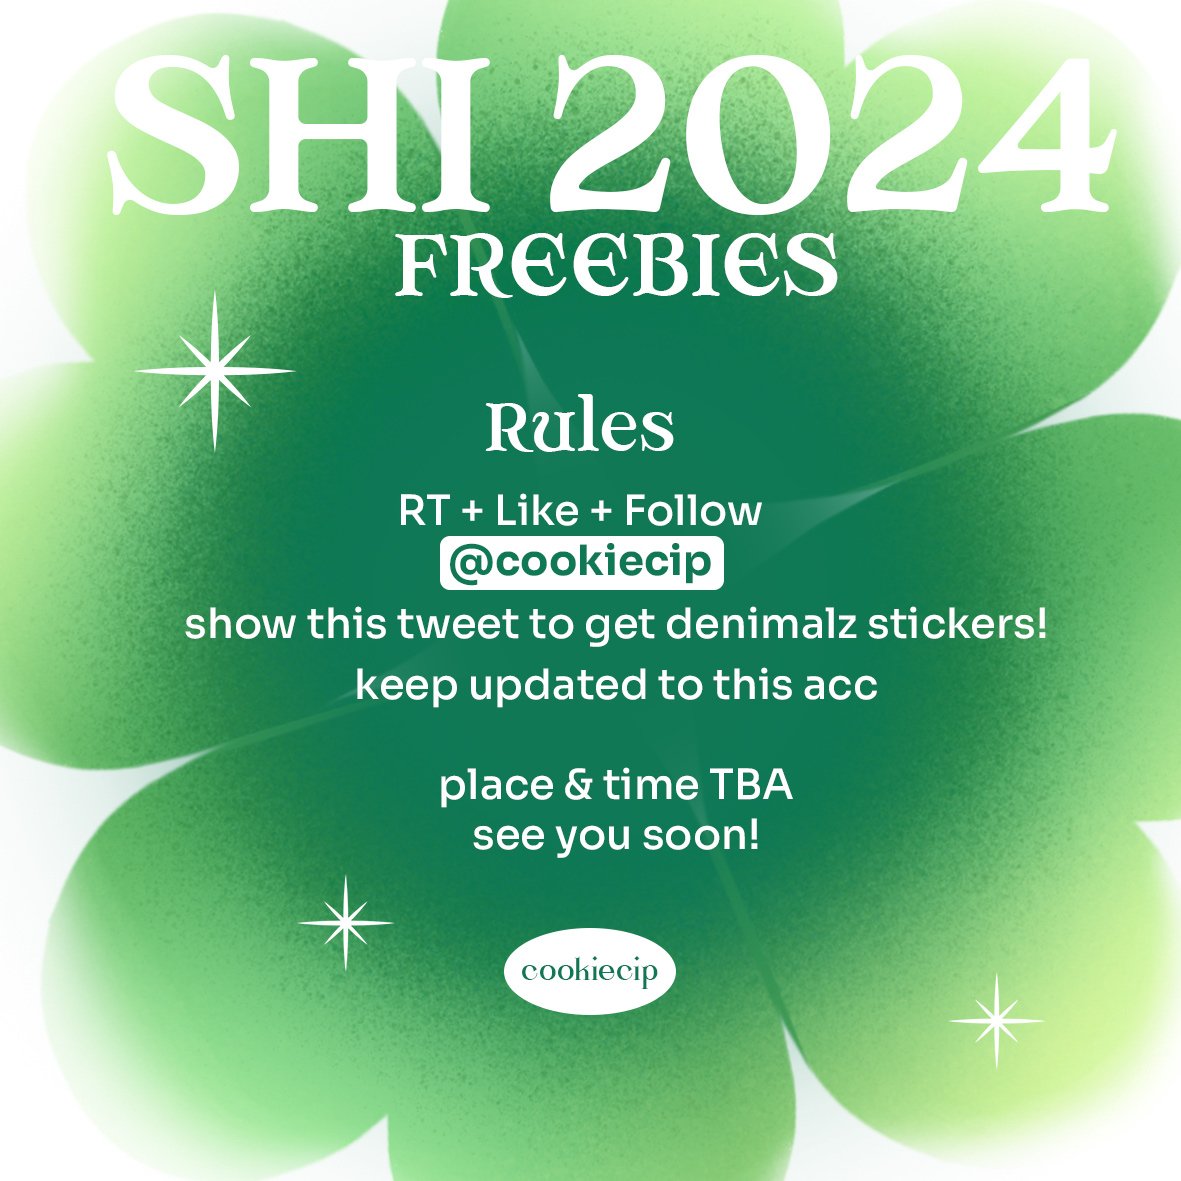 ⊹₊｡ꕤ #SHI2024 FREEBIES ˚₊⊹ by @cookiecip help RT? thank u ♡ anyway first come first serve yaa see you there mydayss mwah 🫶🏻 #DAY6